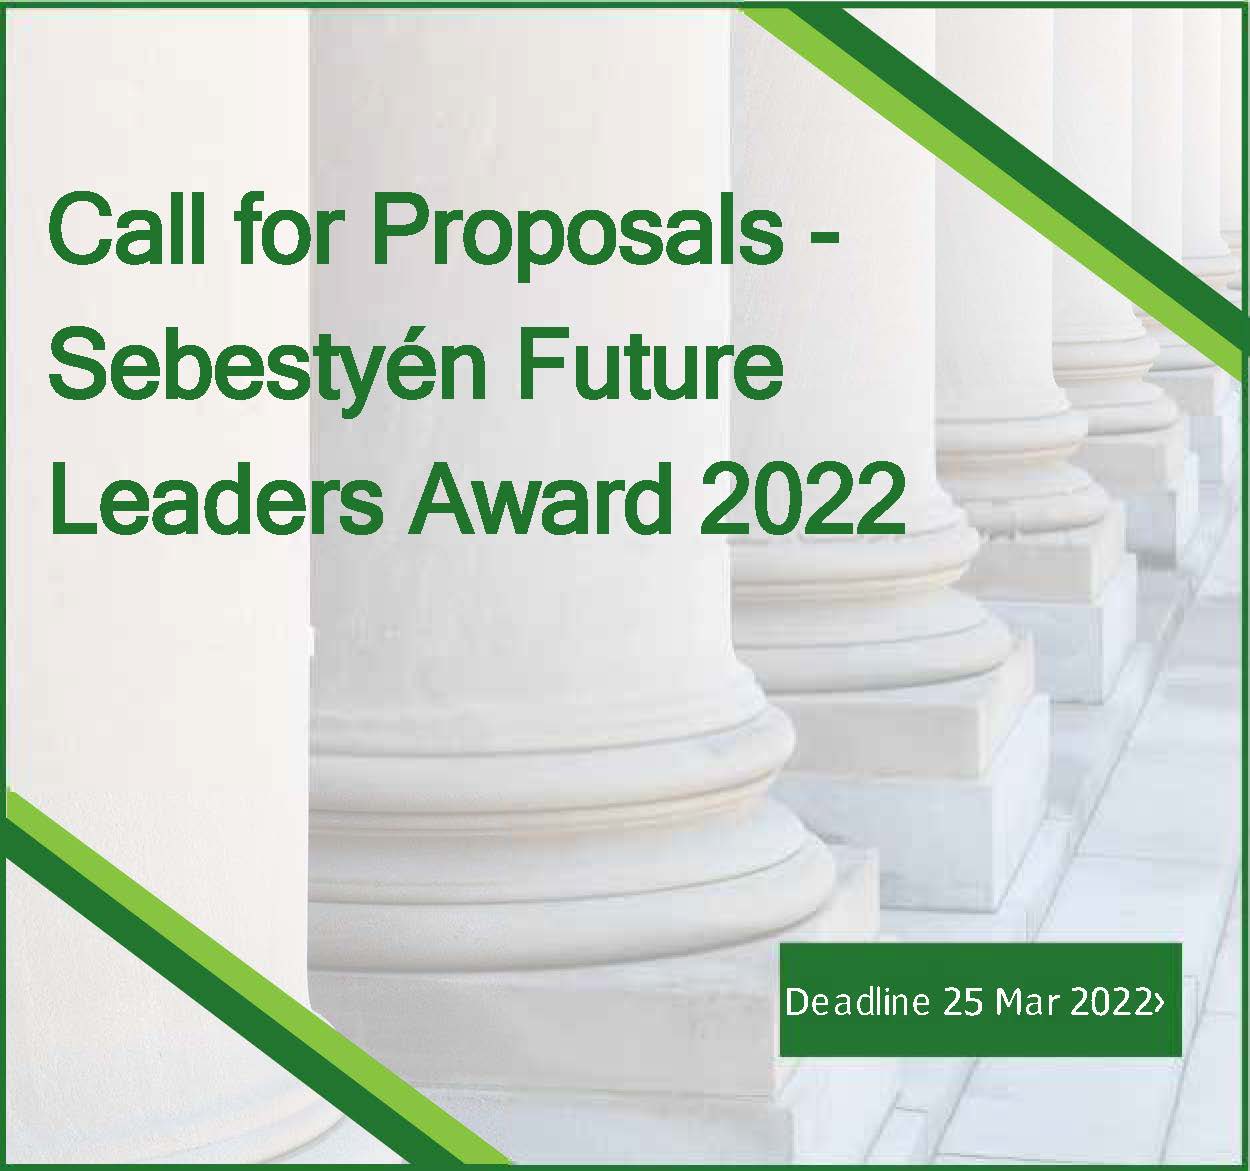 Call for Proposals – Sebestyén Future Leaders Award 2022